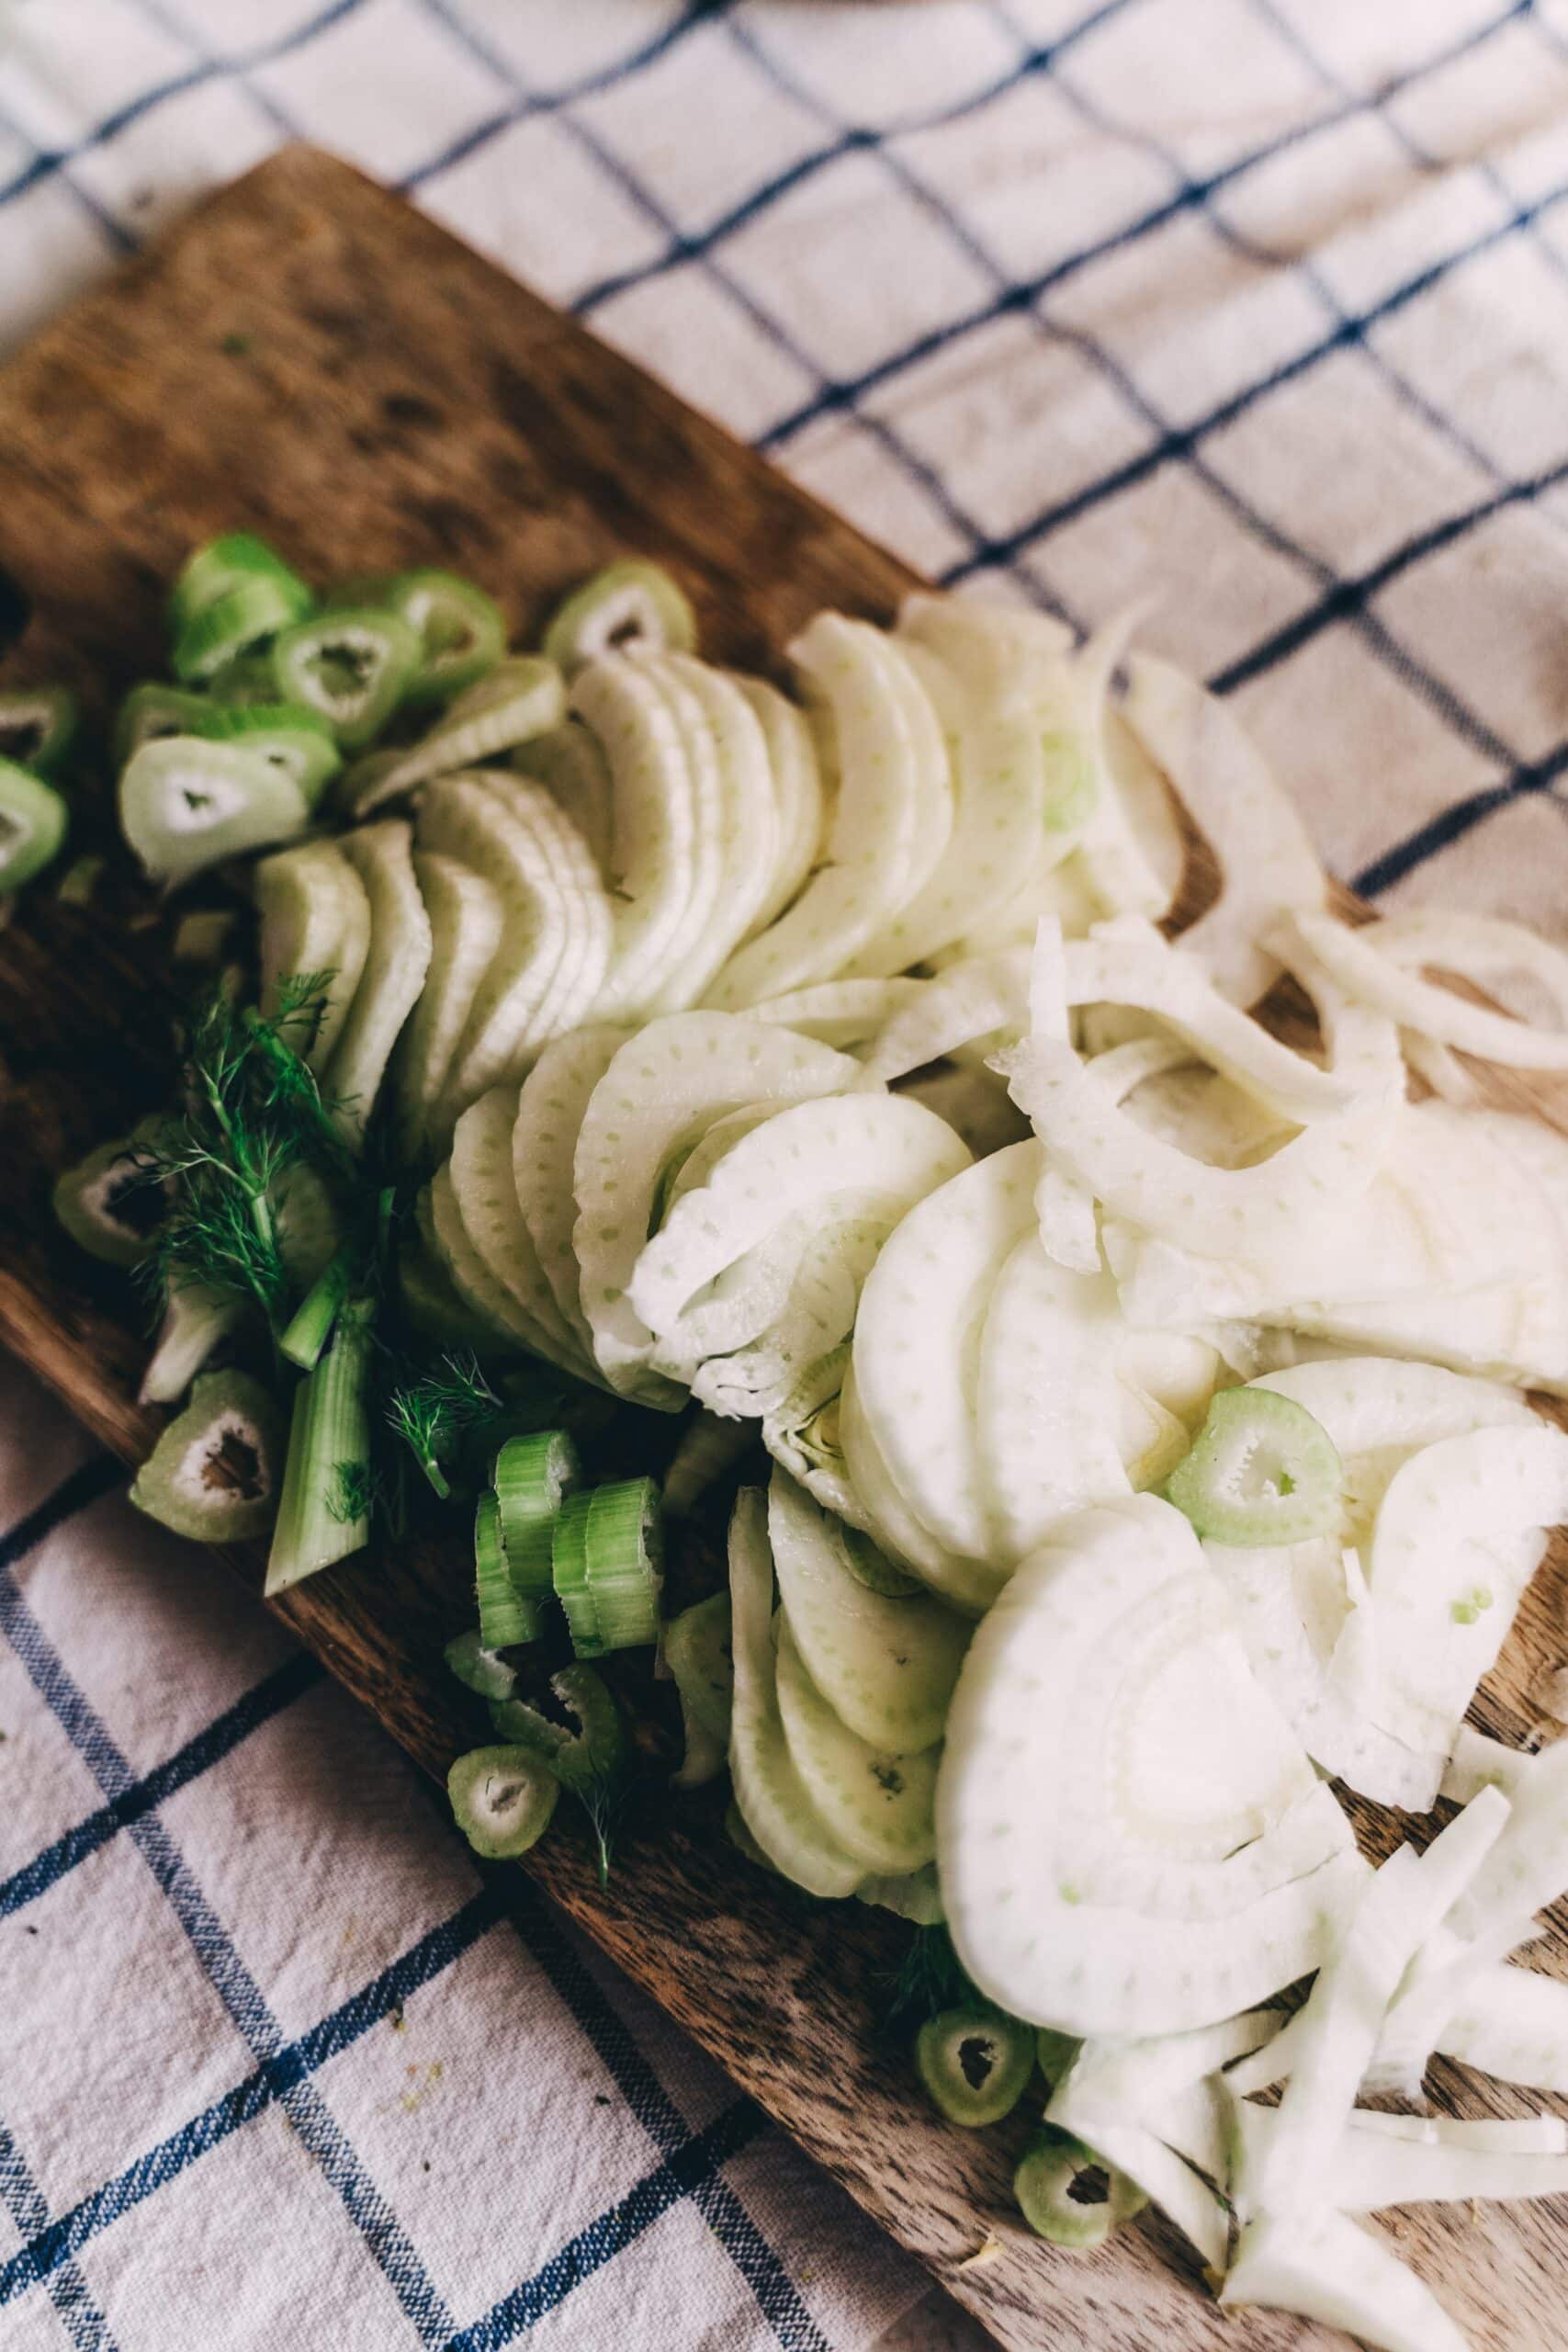 Which parts of fennel do you eat?